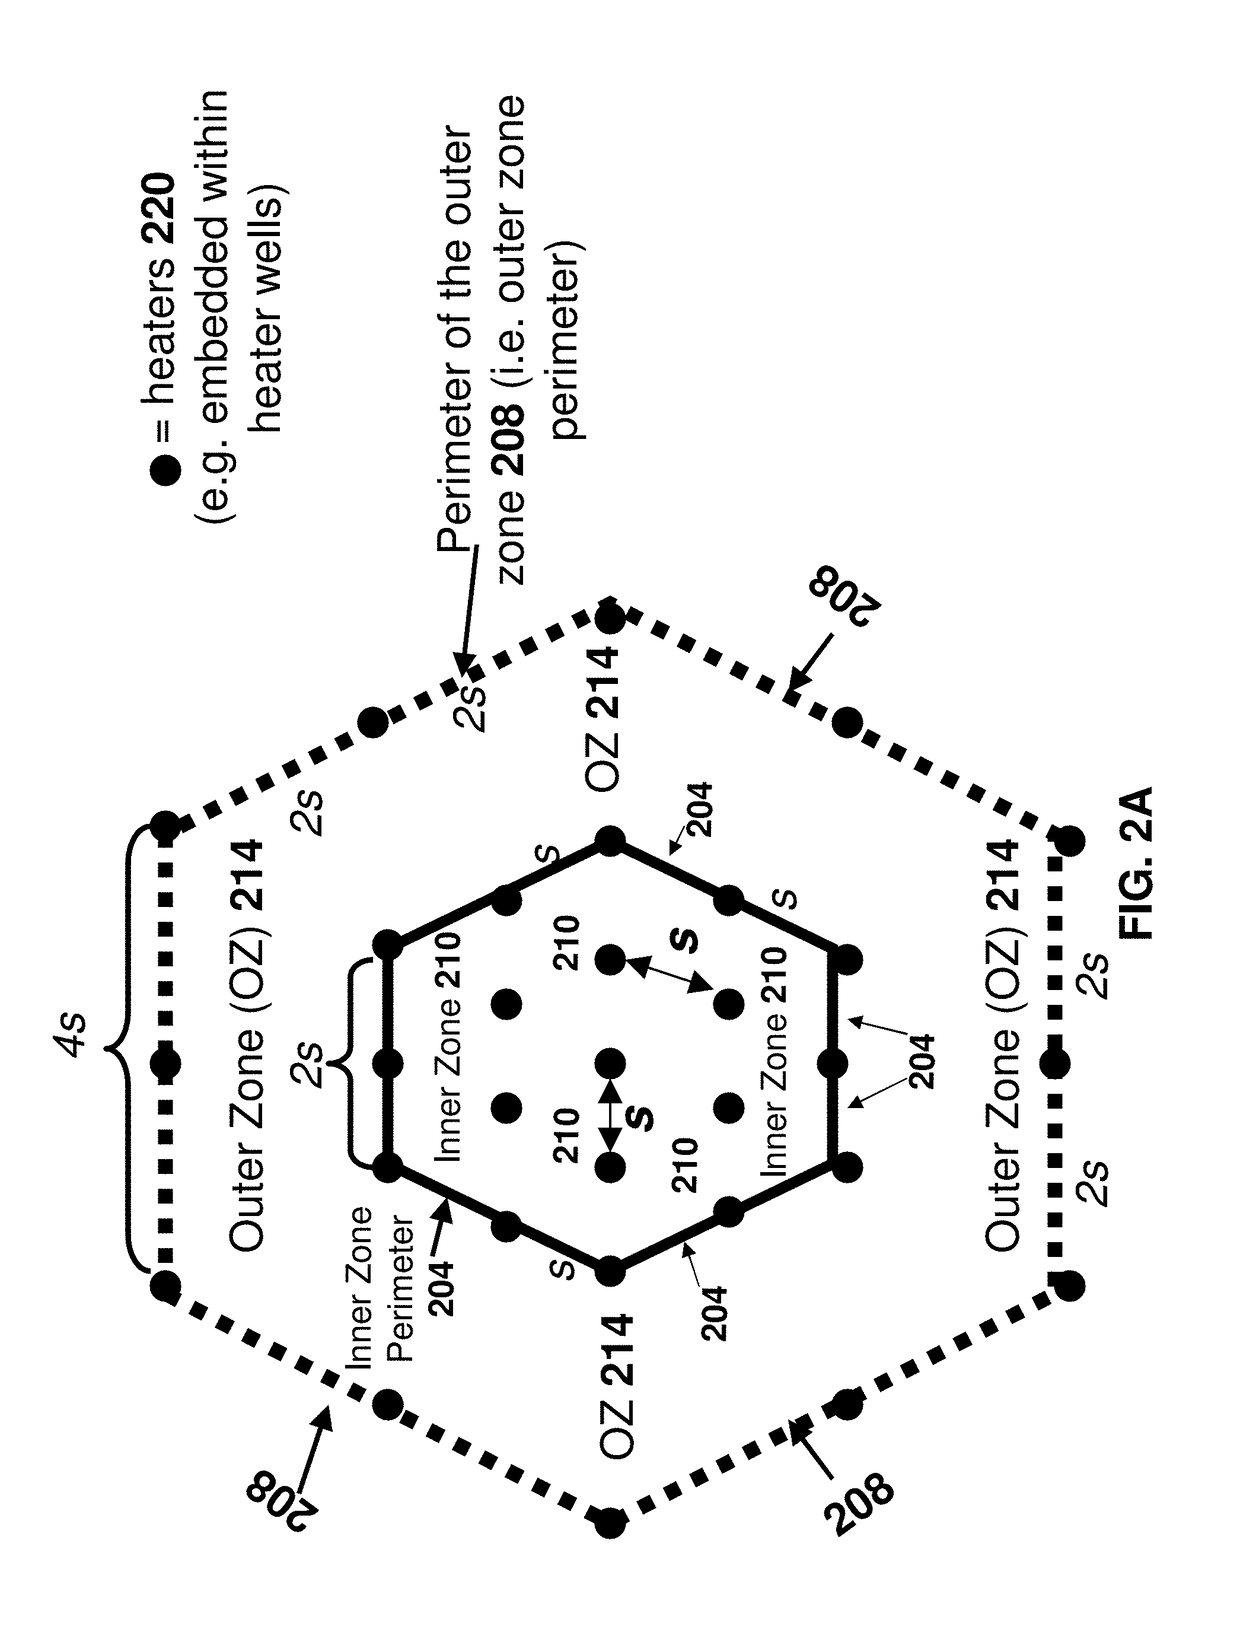 Heater pattern for in situ thermal processing of a subsurface hydrocarbon containing formation